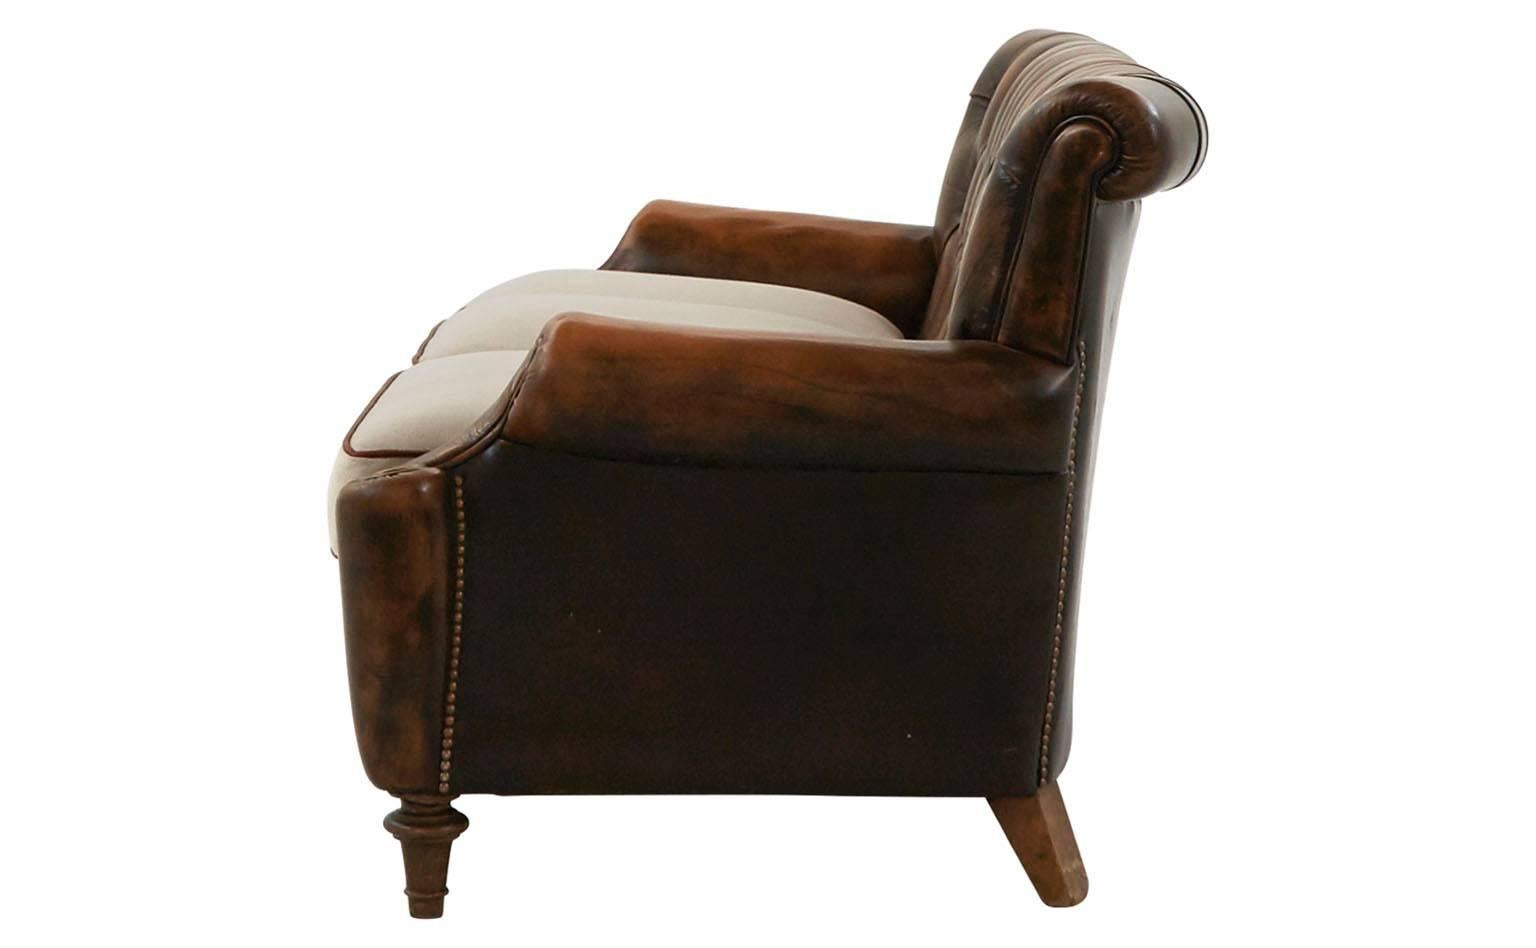 Original tufted leather.
Reupholstered in natural linen with leather welt,
20th century,
Barcelona.

Dimensions:
Overall: 75" W x 35" D x 30" H.
Seat height 18" H.
Arm height 21" H.